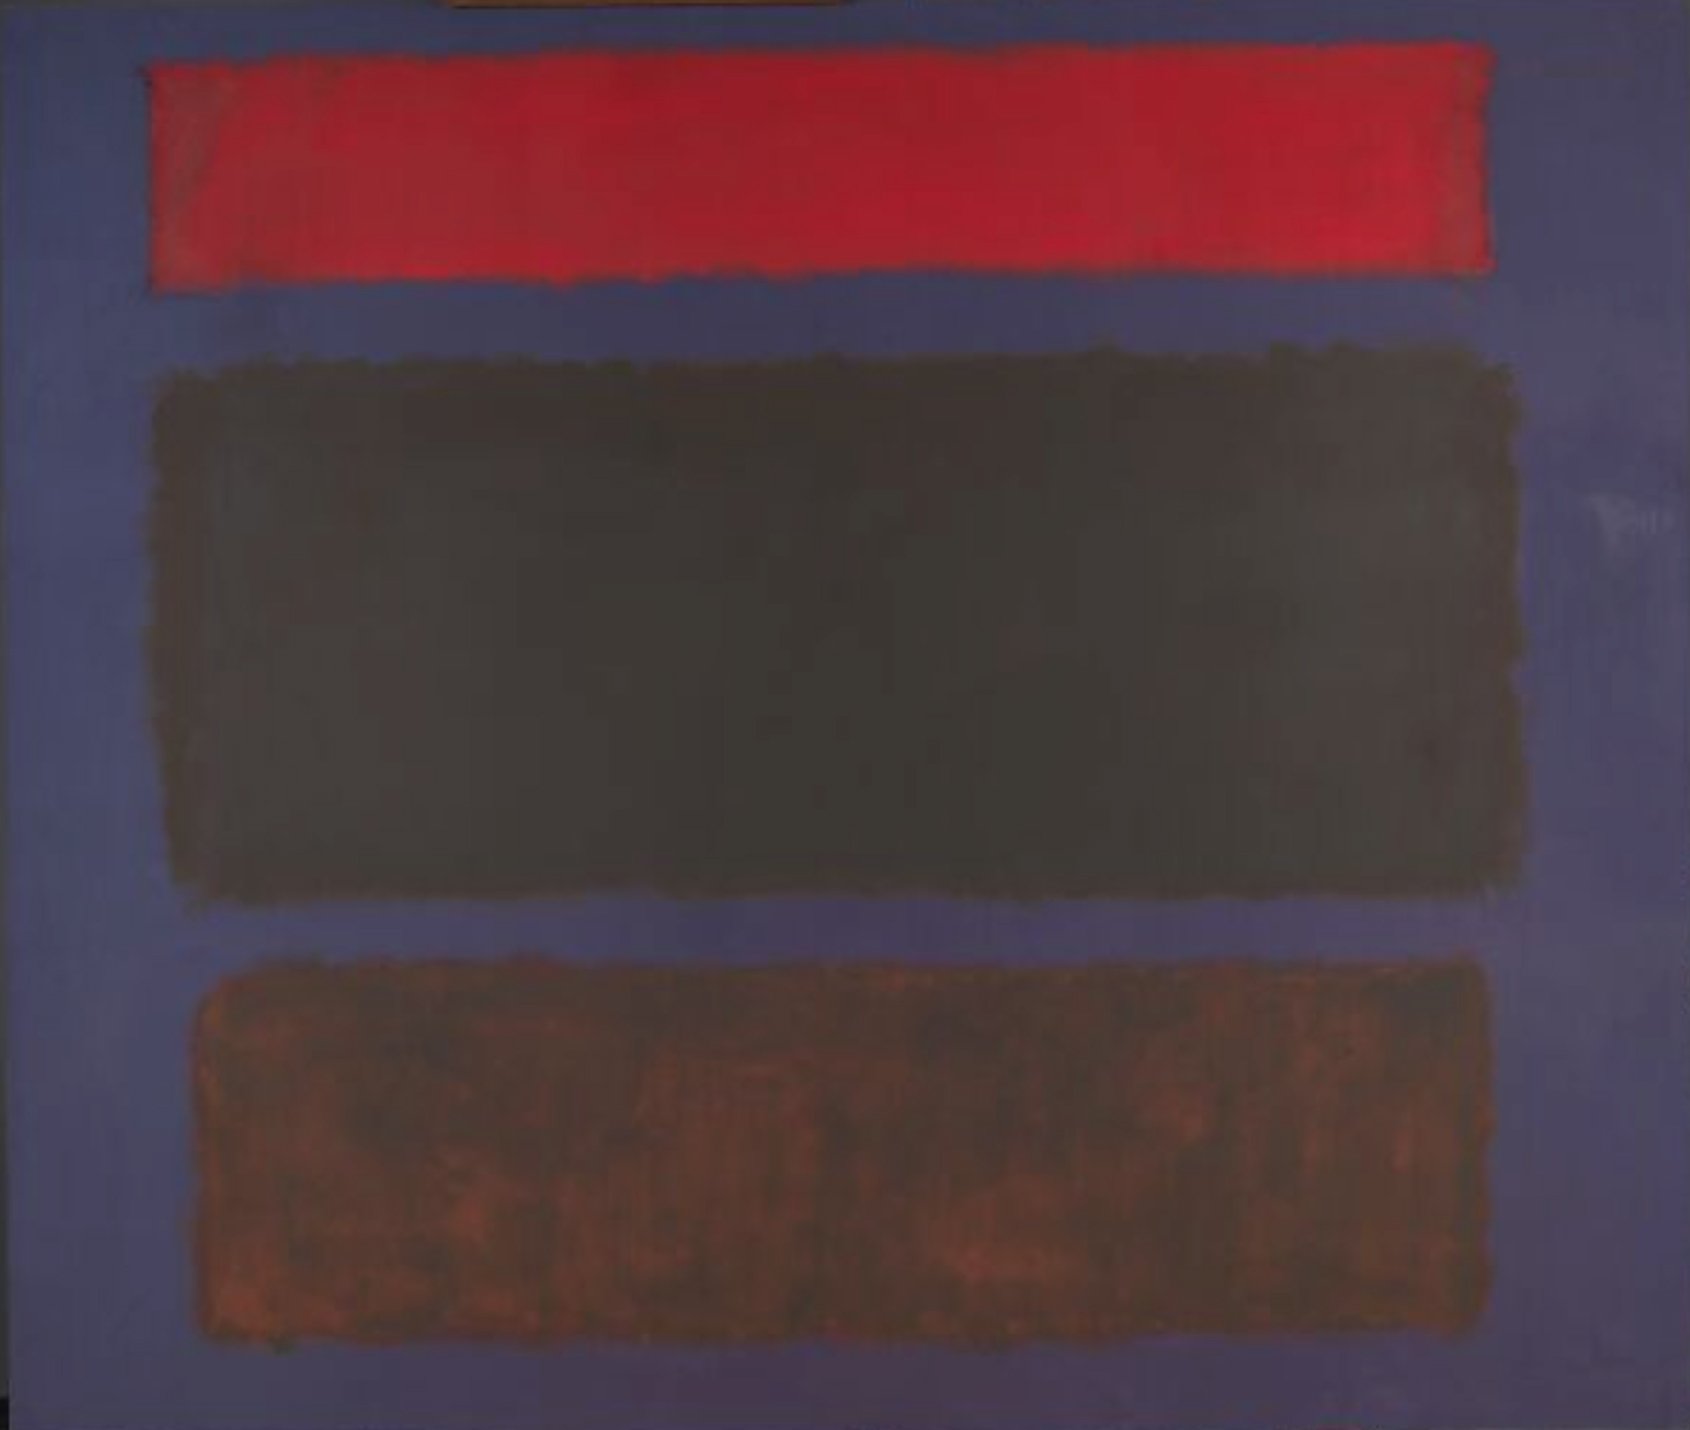 An abstract painting by Mark Rothko with three horizontal rectangles of different colors on a blue background.